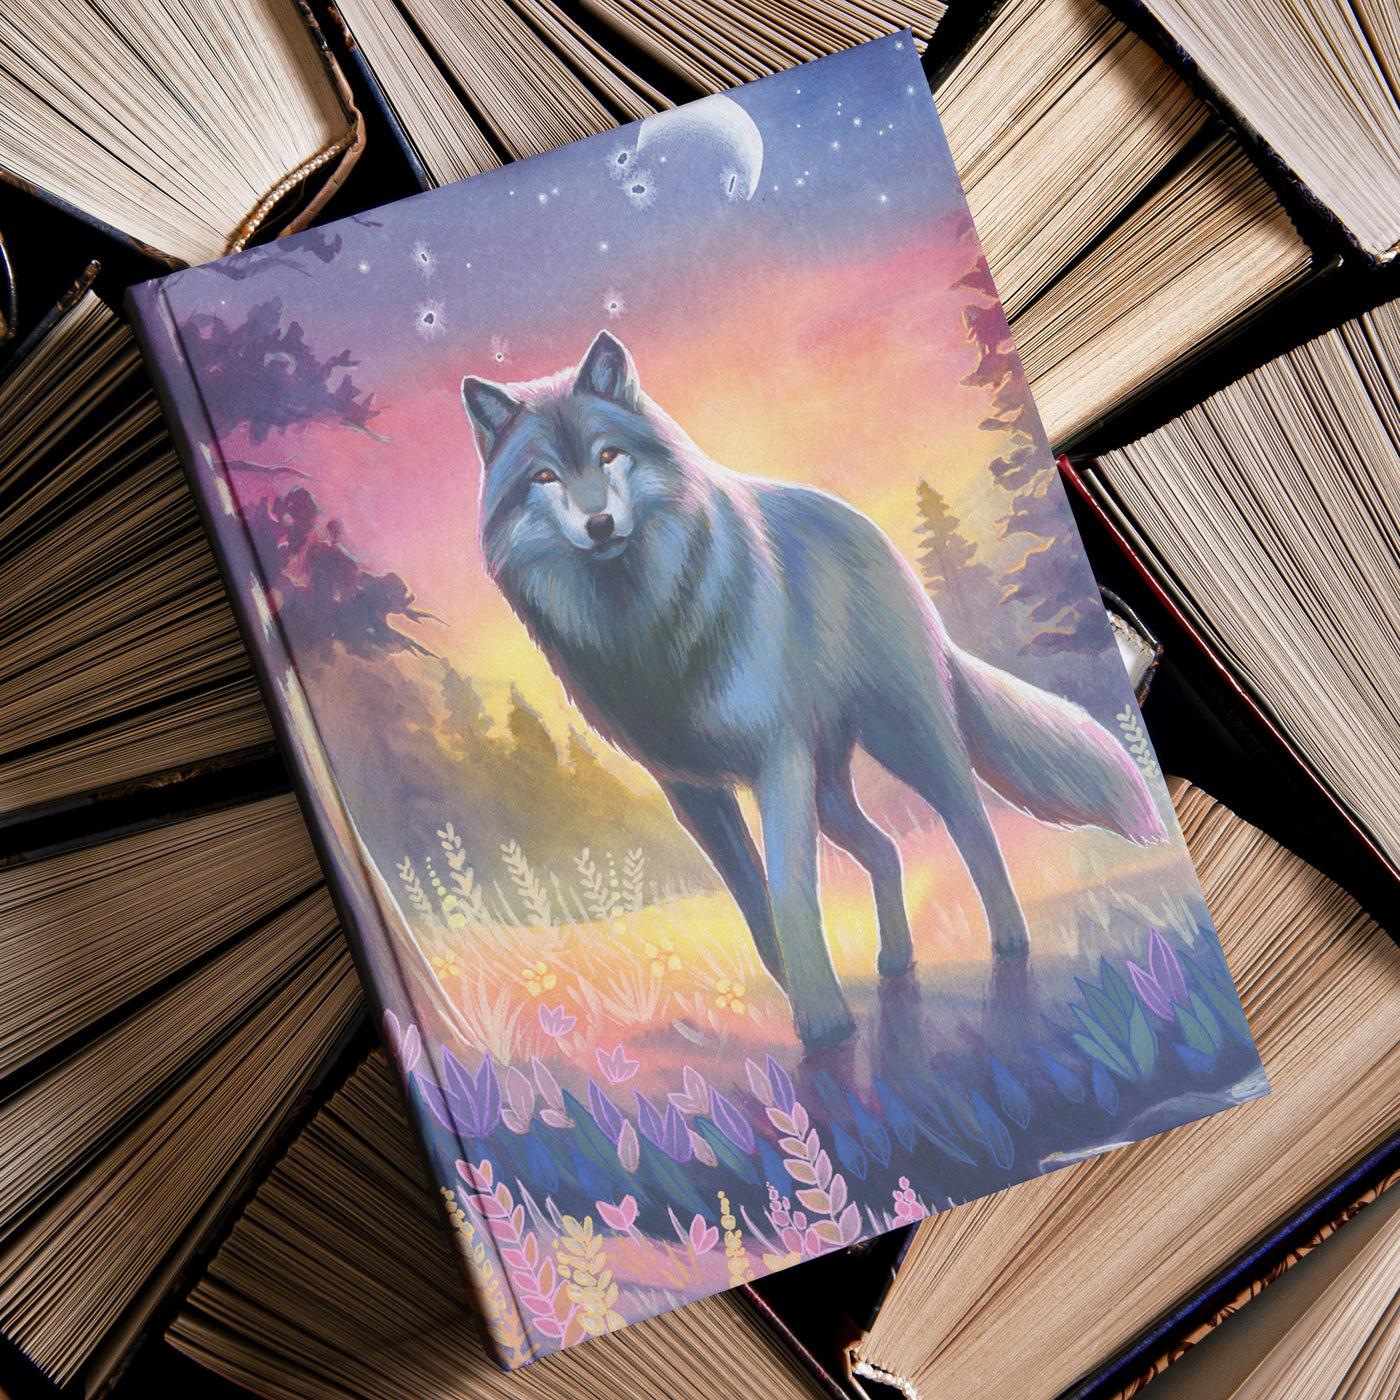 Wolf Journal with a colorful illustrated cover of a wolf standing in a forest at dusk, surrounded by vintage books.